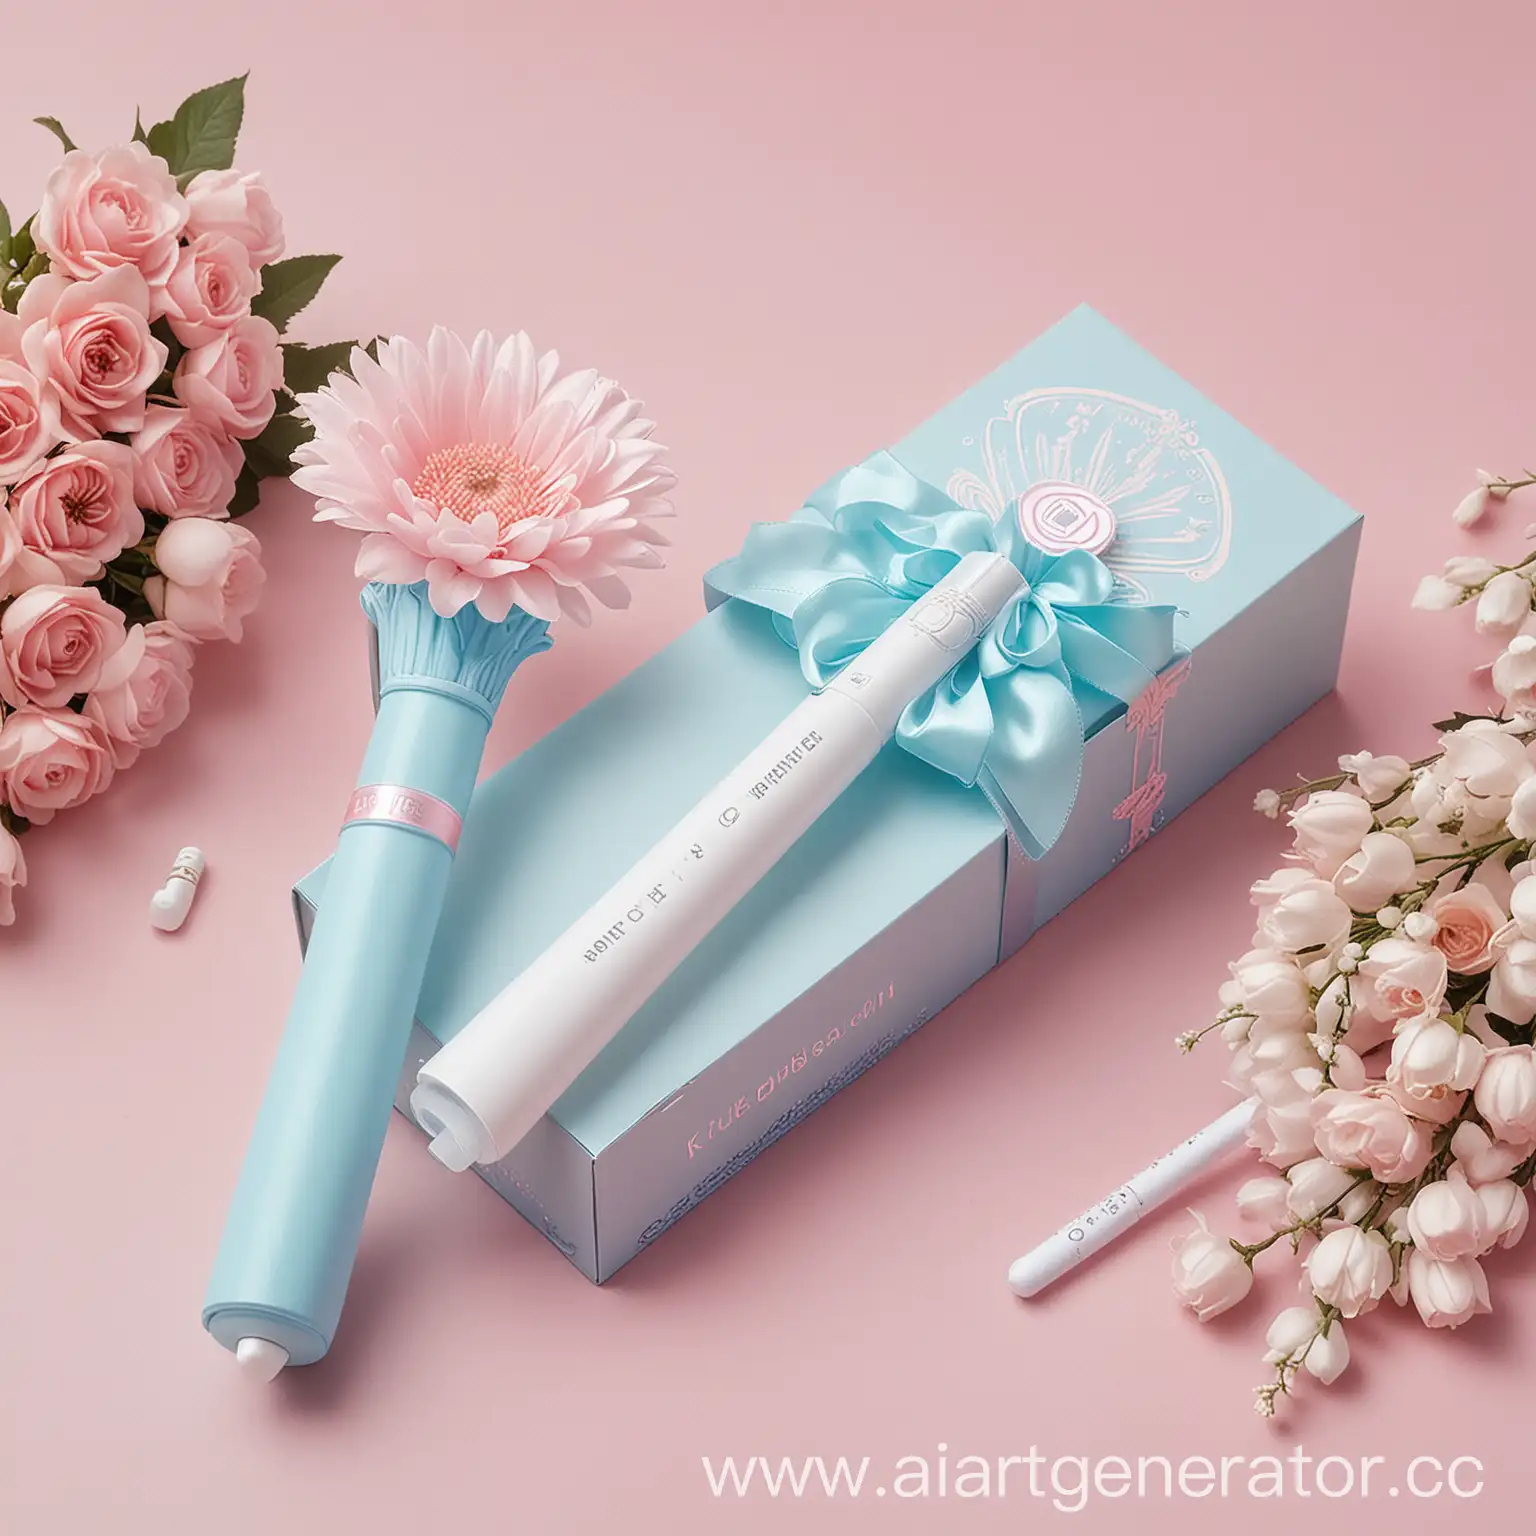 kpop lightstick in pastel blue and pink in a flower way royal white with the box next to it